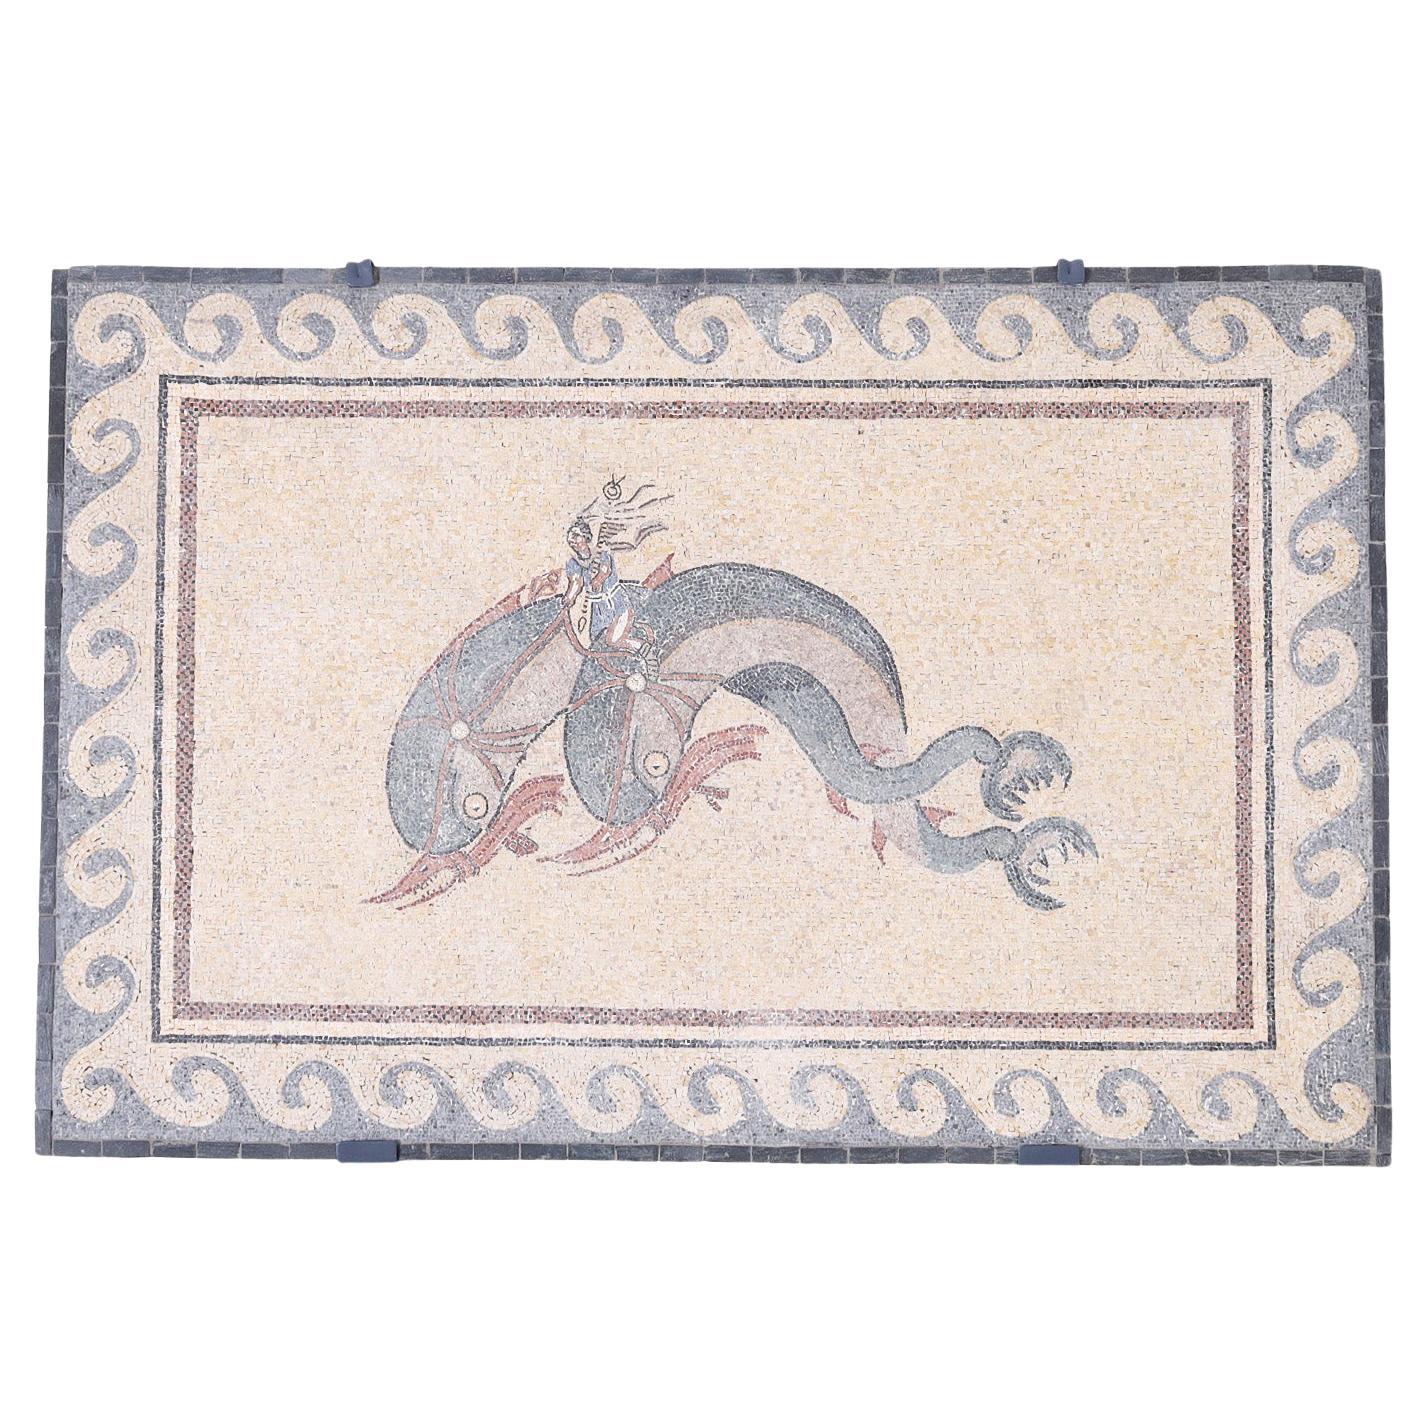 Micro Mosaic Plaque of Eros Riding Two Dolphins